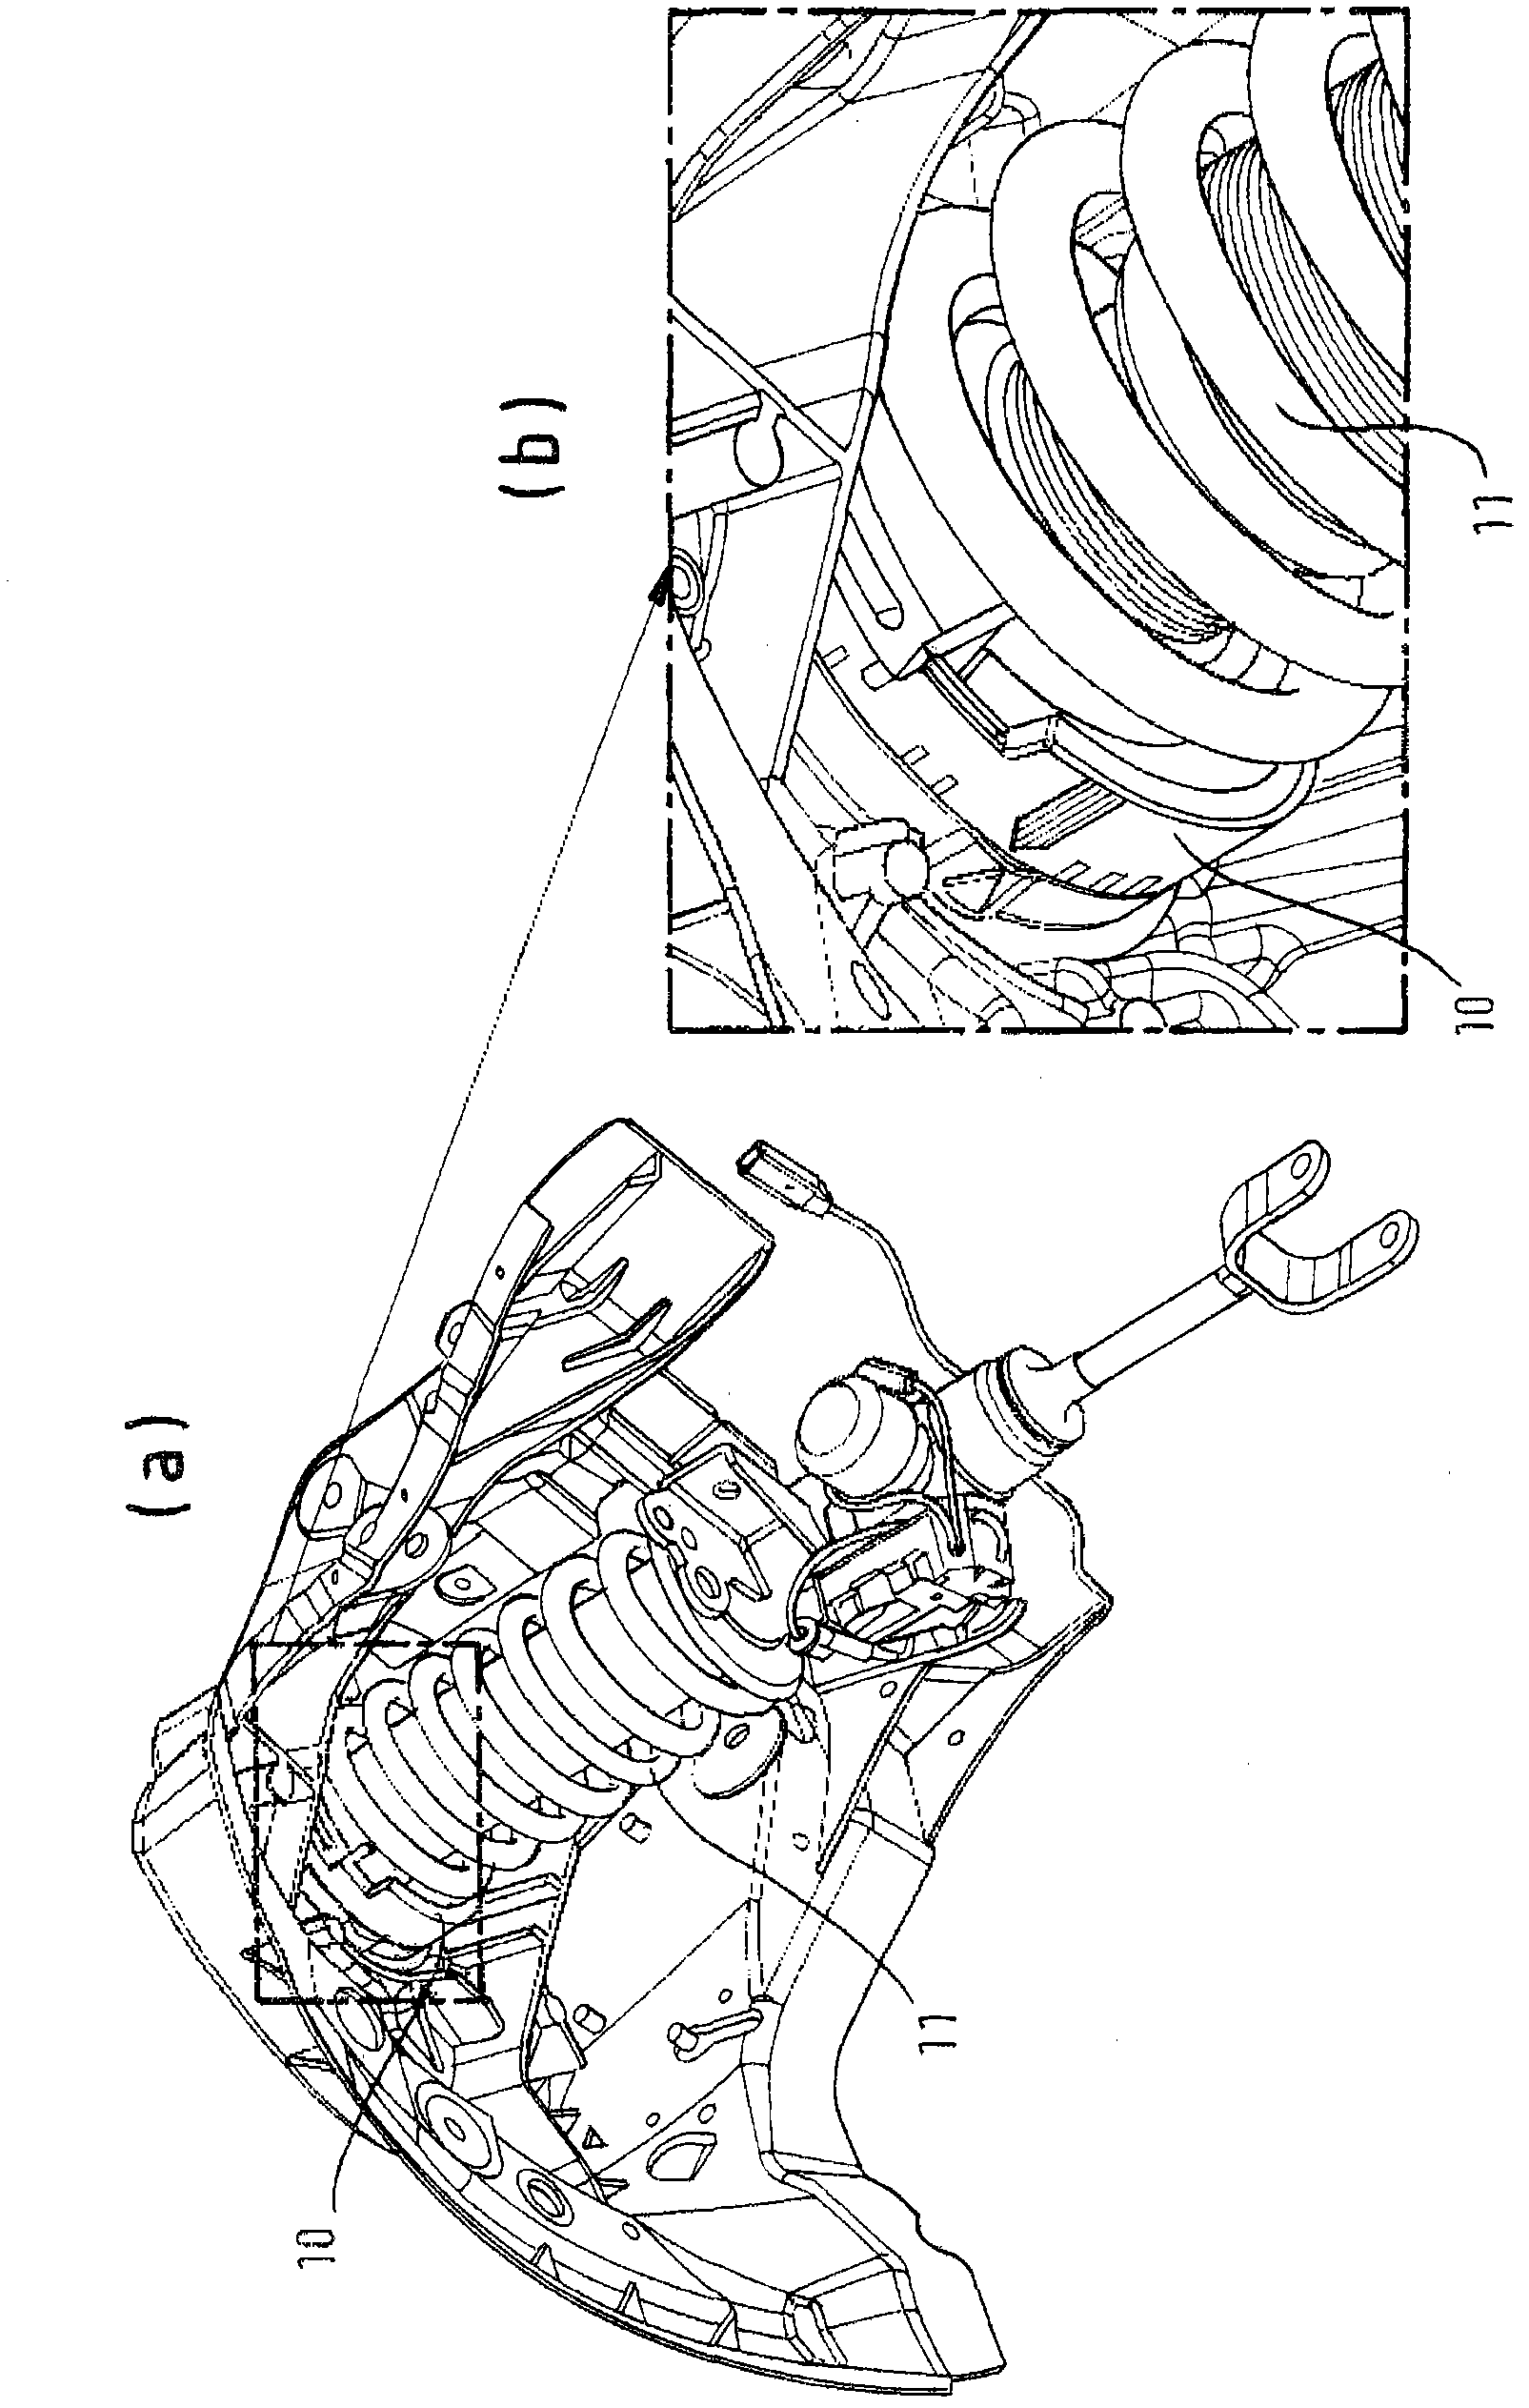 Spring support and method for producing the same